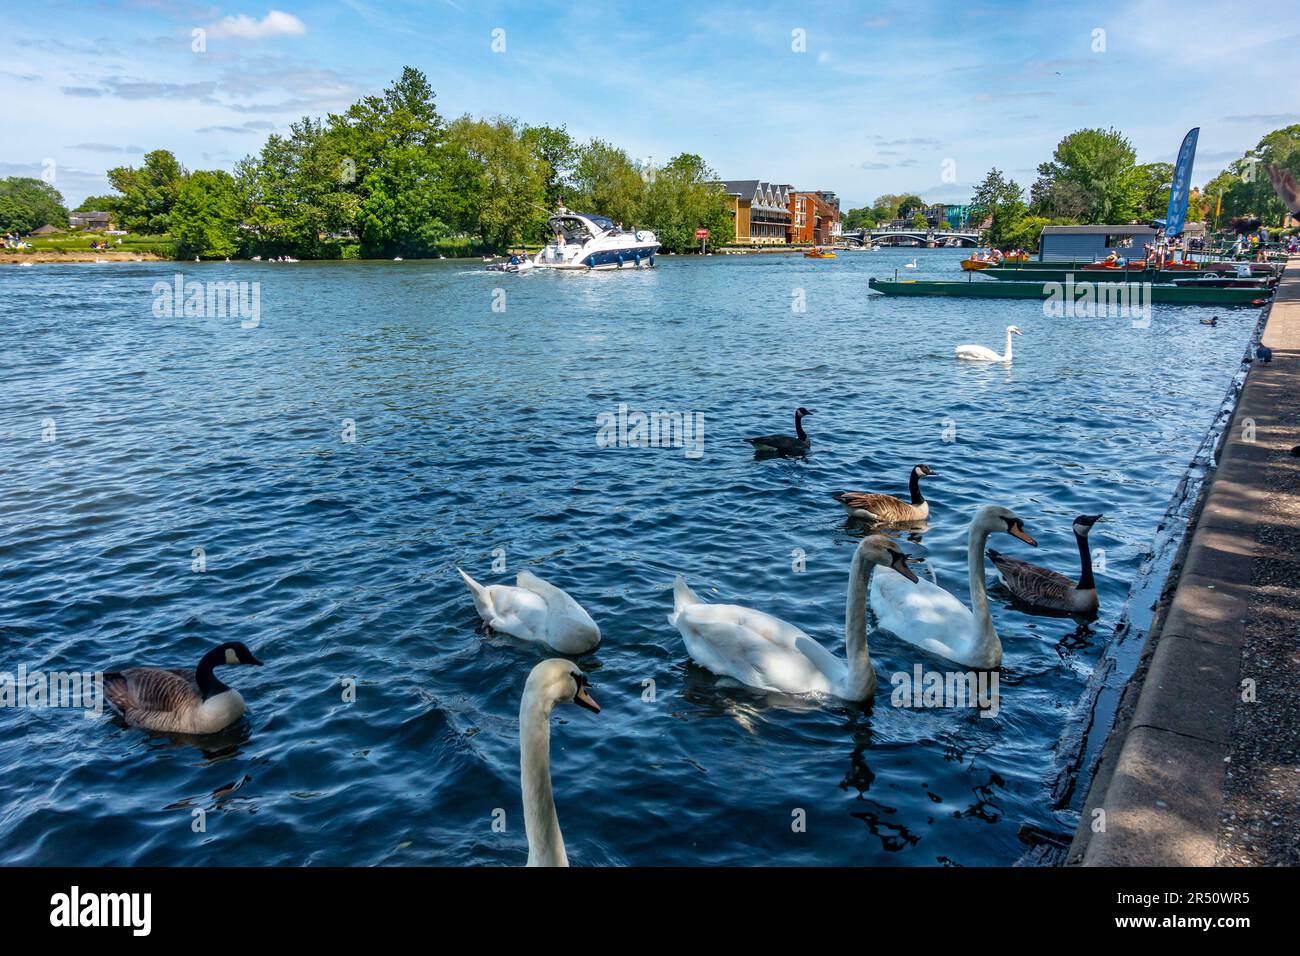 Swans and Canada geese on The River Thames at Windsor in Berkshire, UK Stock Photo